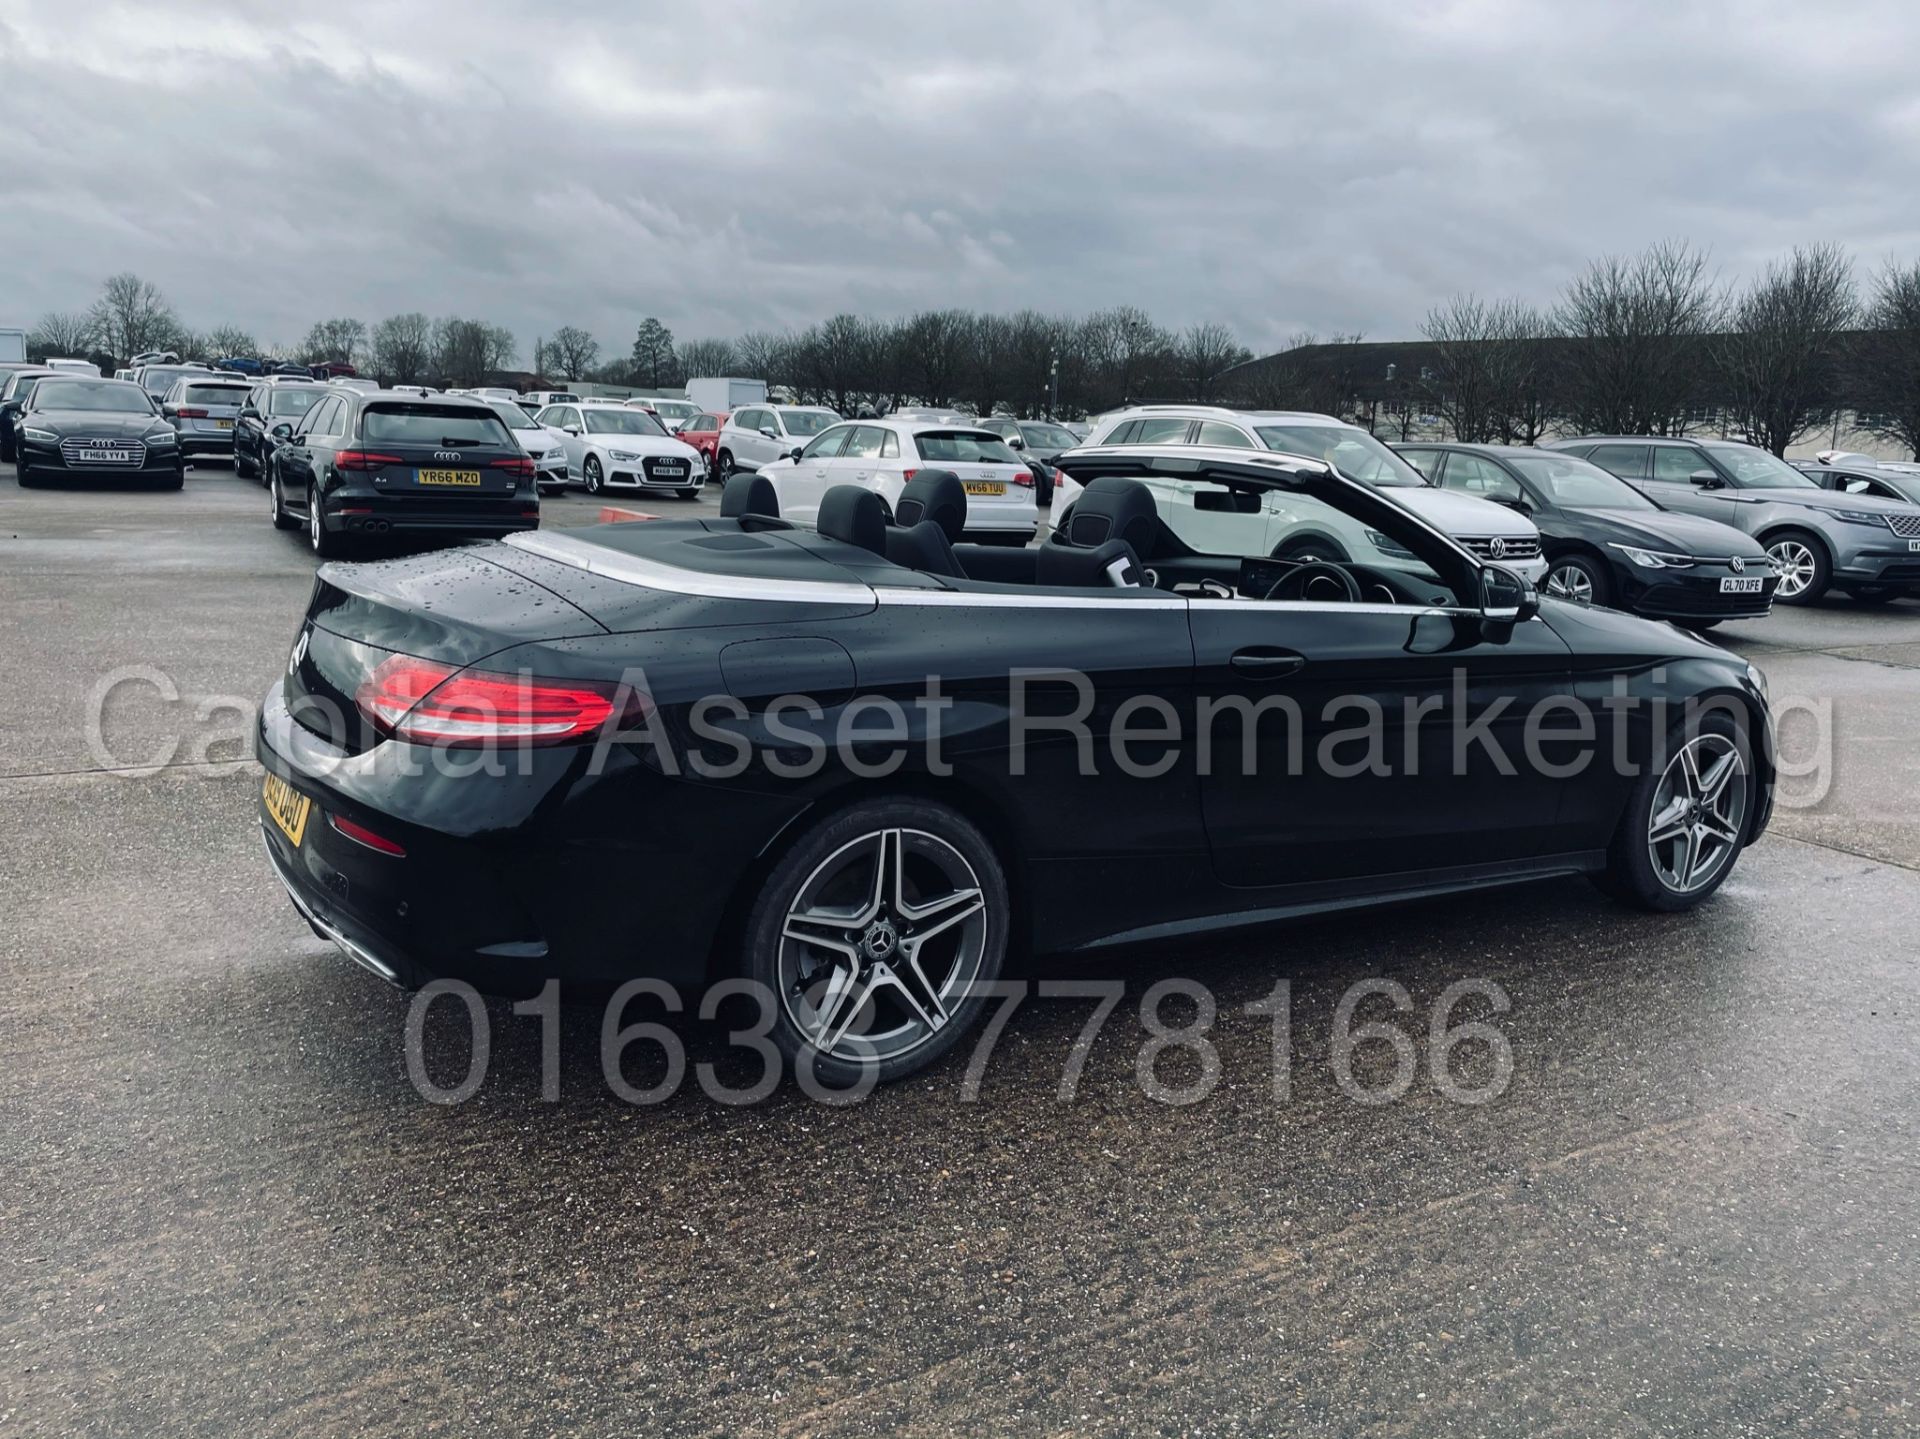 (ON SALE) MERCEDES-BENZ C220D *AMG LINE - CABRIOLET* (2019) '9G TRONIC AUTO - LEATHER - SAT NAV' - Image 18 of 56